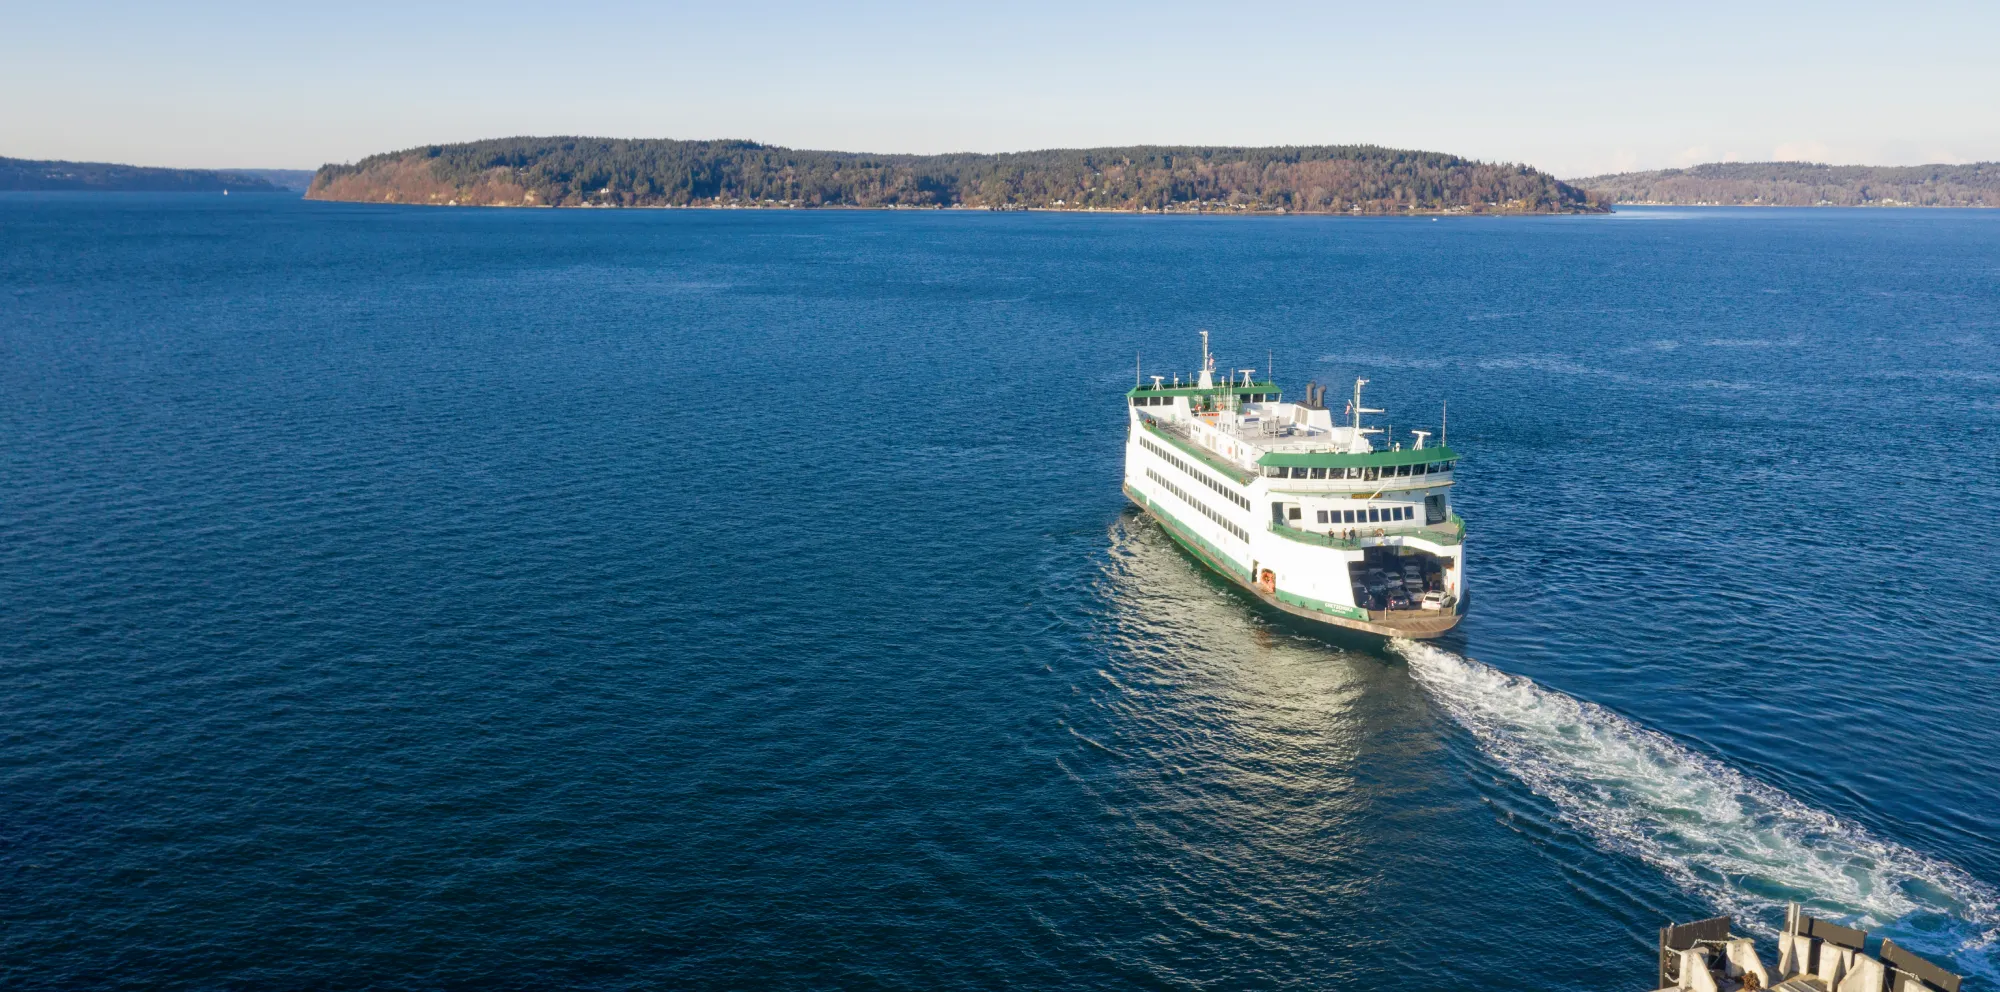 The Fauntleroy-Vashon ferry crosses the Puget Sound on its way to Vashon Island.